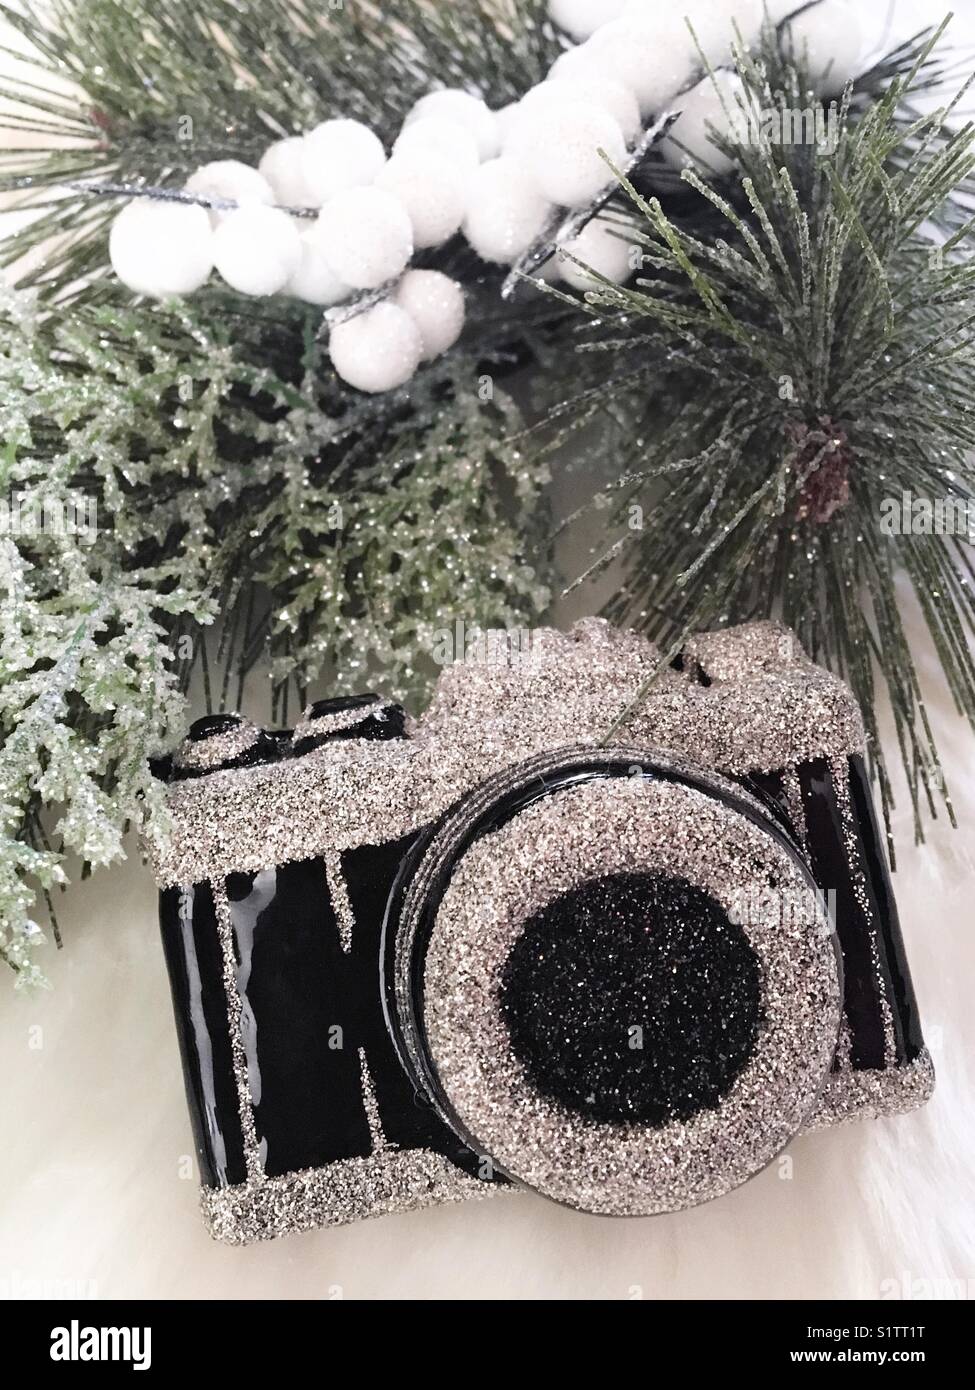 Camera ornament with winter greens Stock Photo